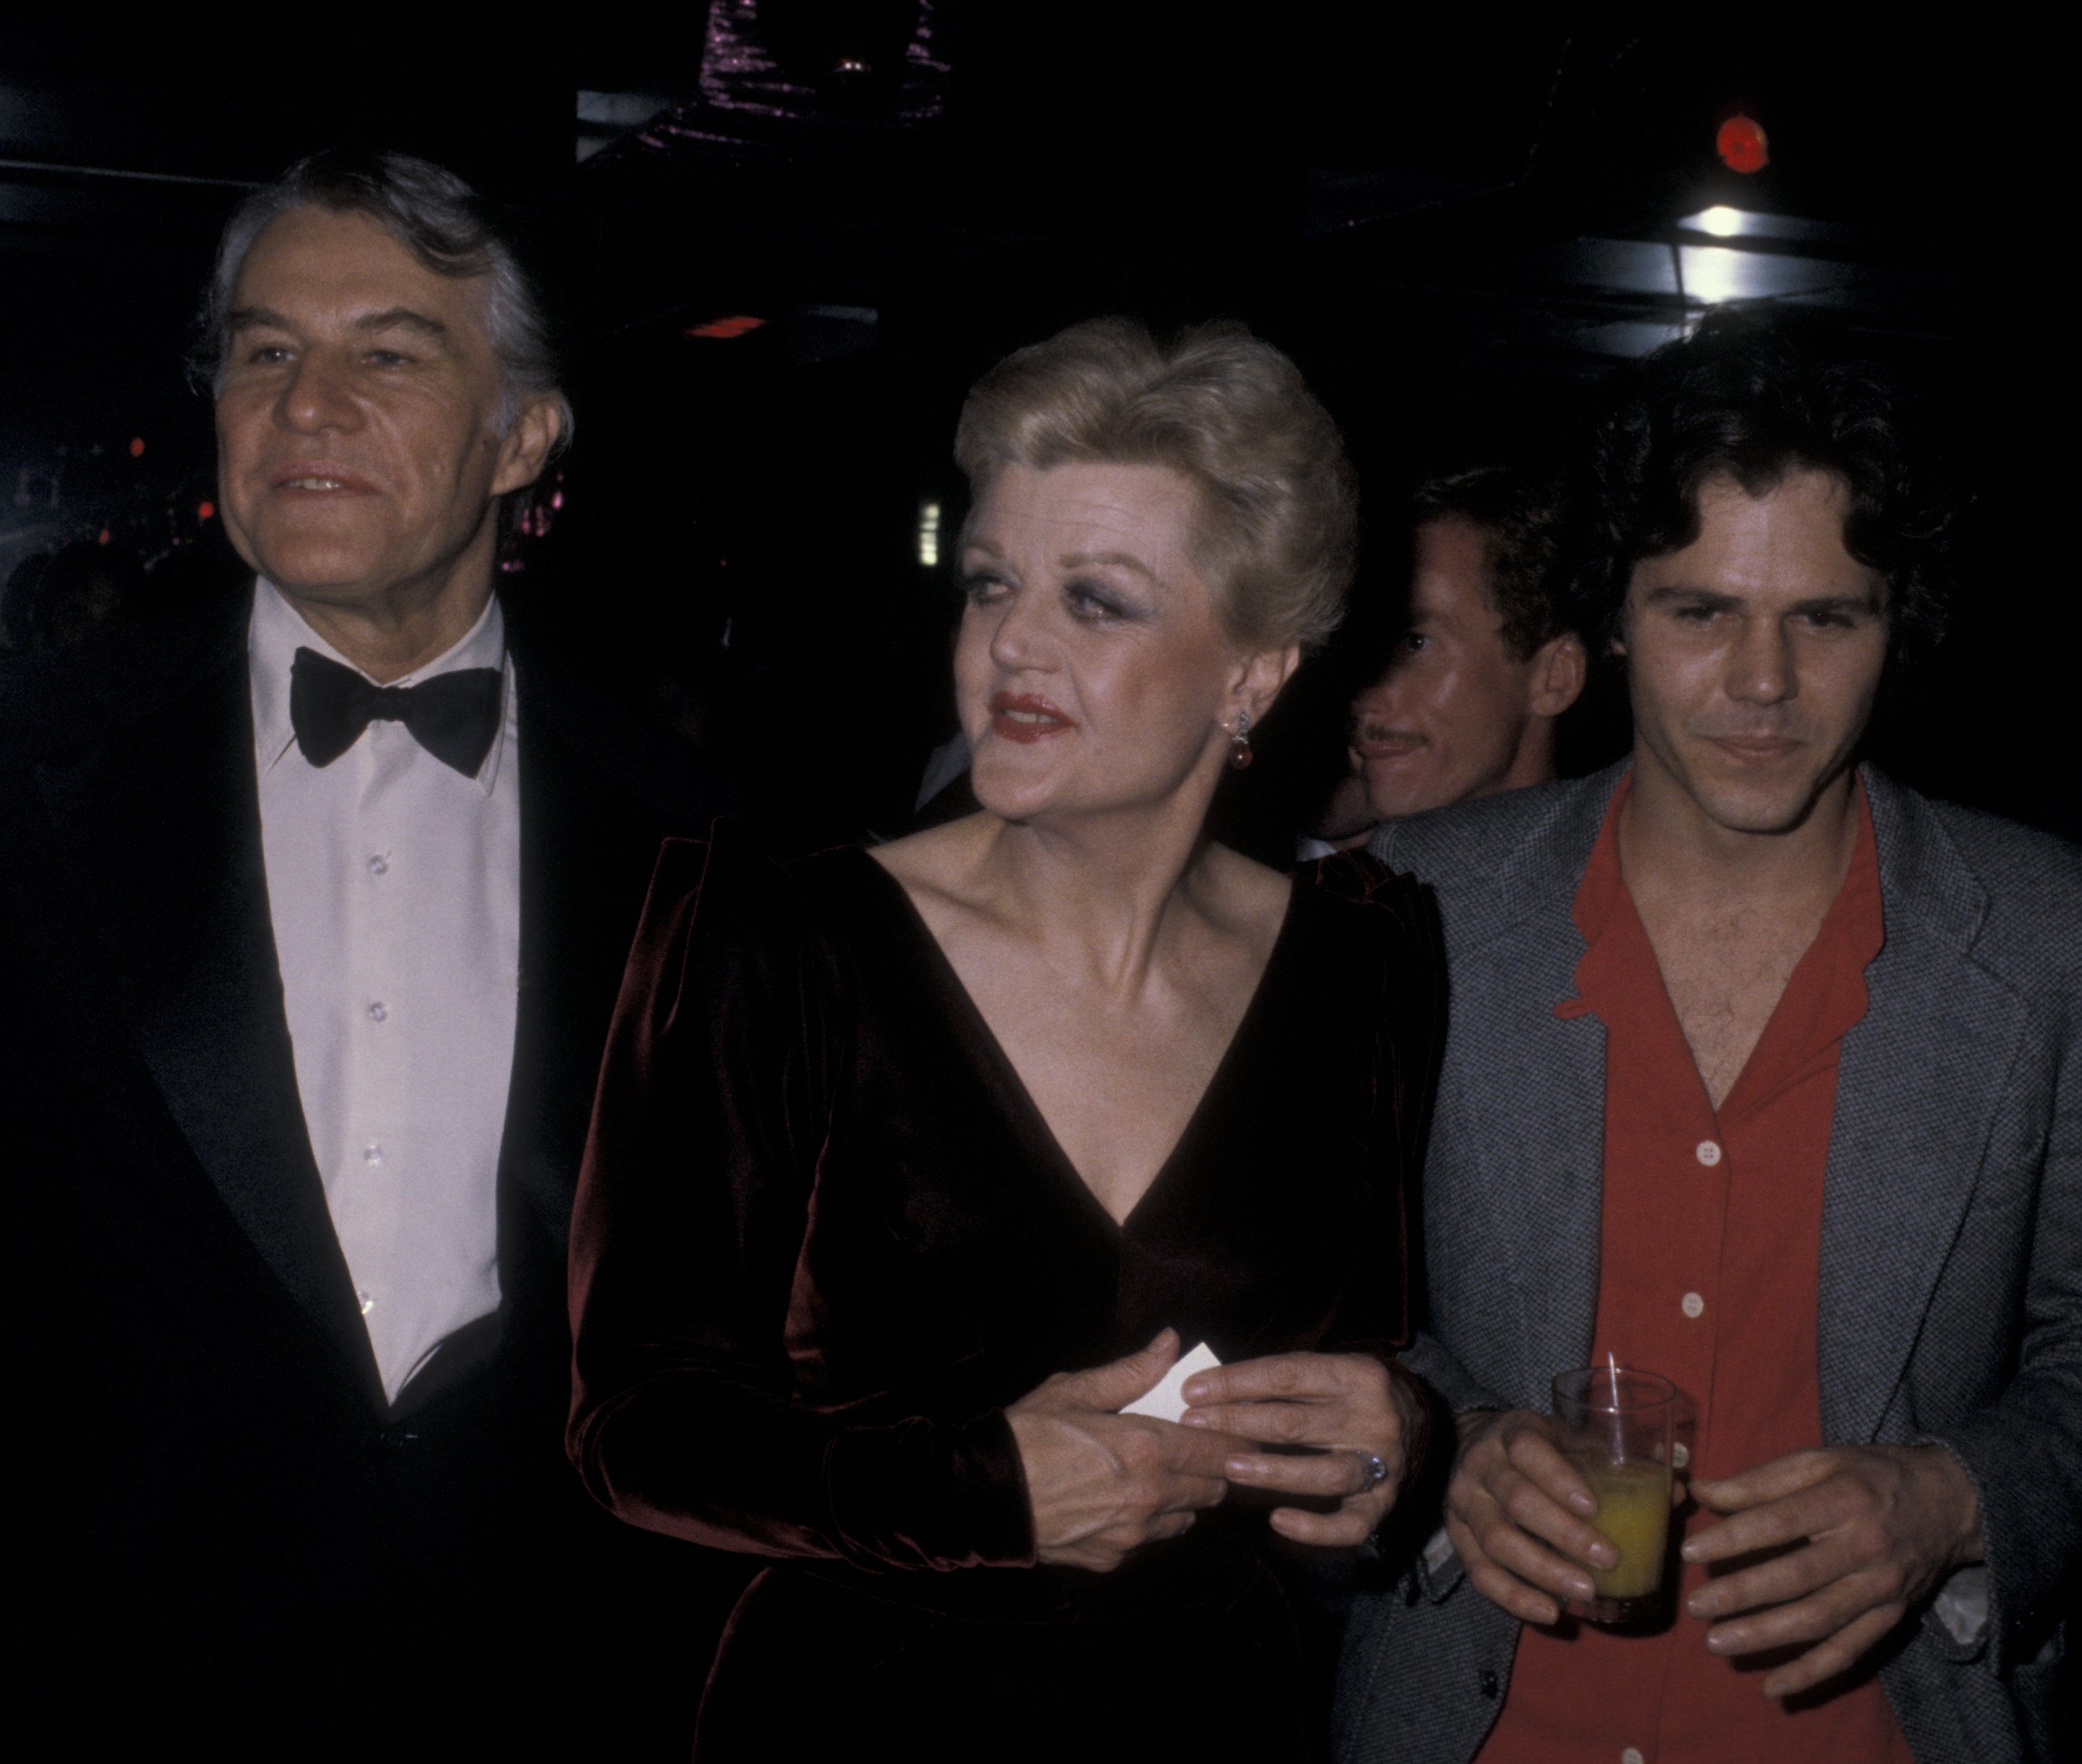 Actress Angela Lansbury, husband Peter Shaw and son Anthony Shaw attend Ruby Awards on December 16, 1979 at New York New York Disco in New York City. | Source: Getty Images